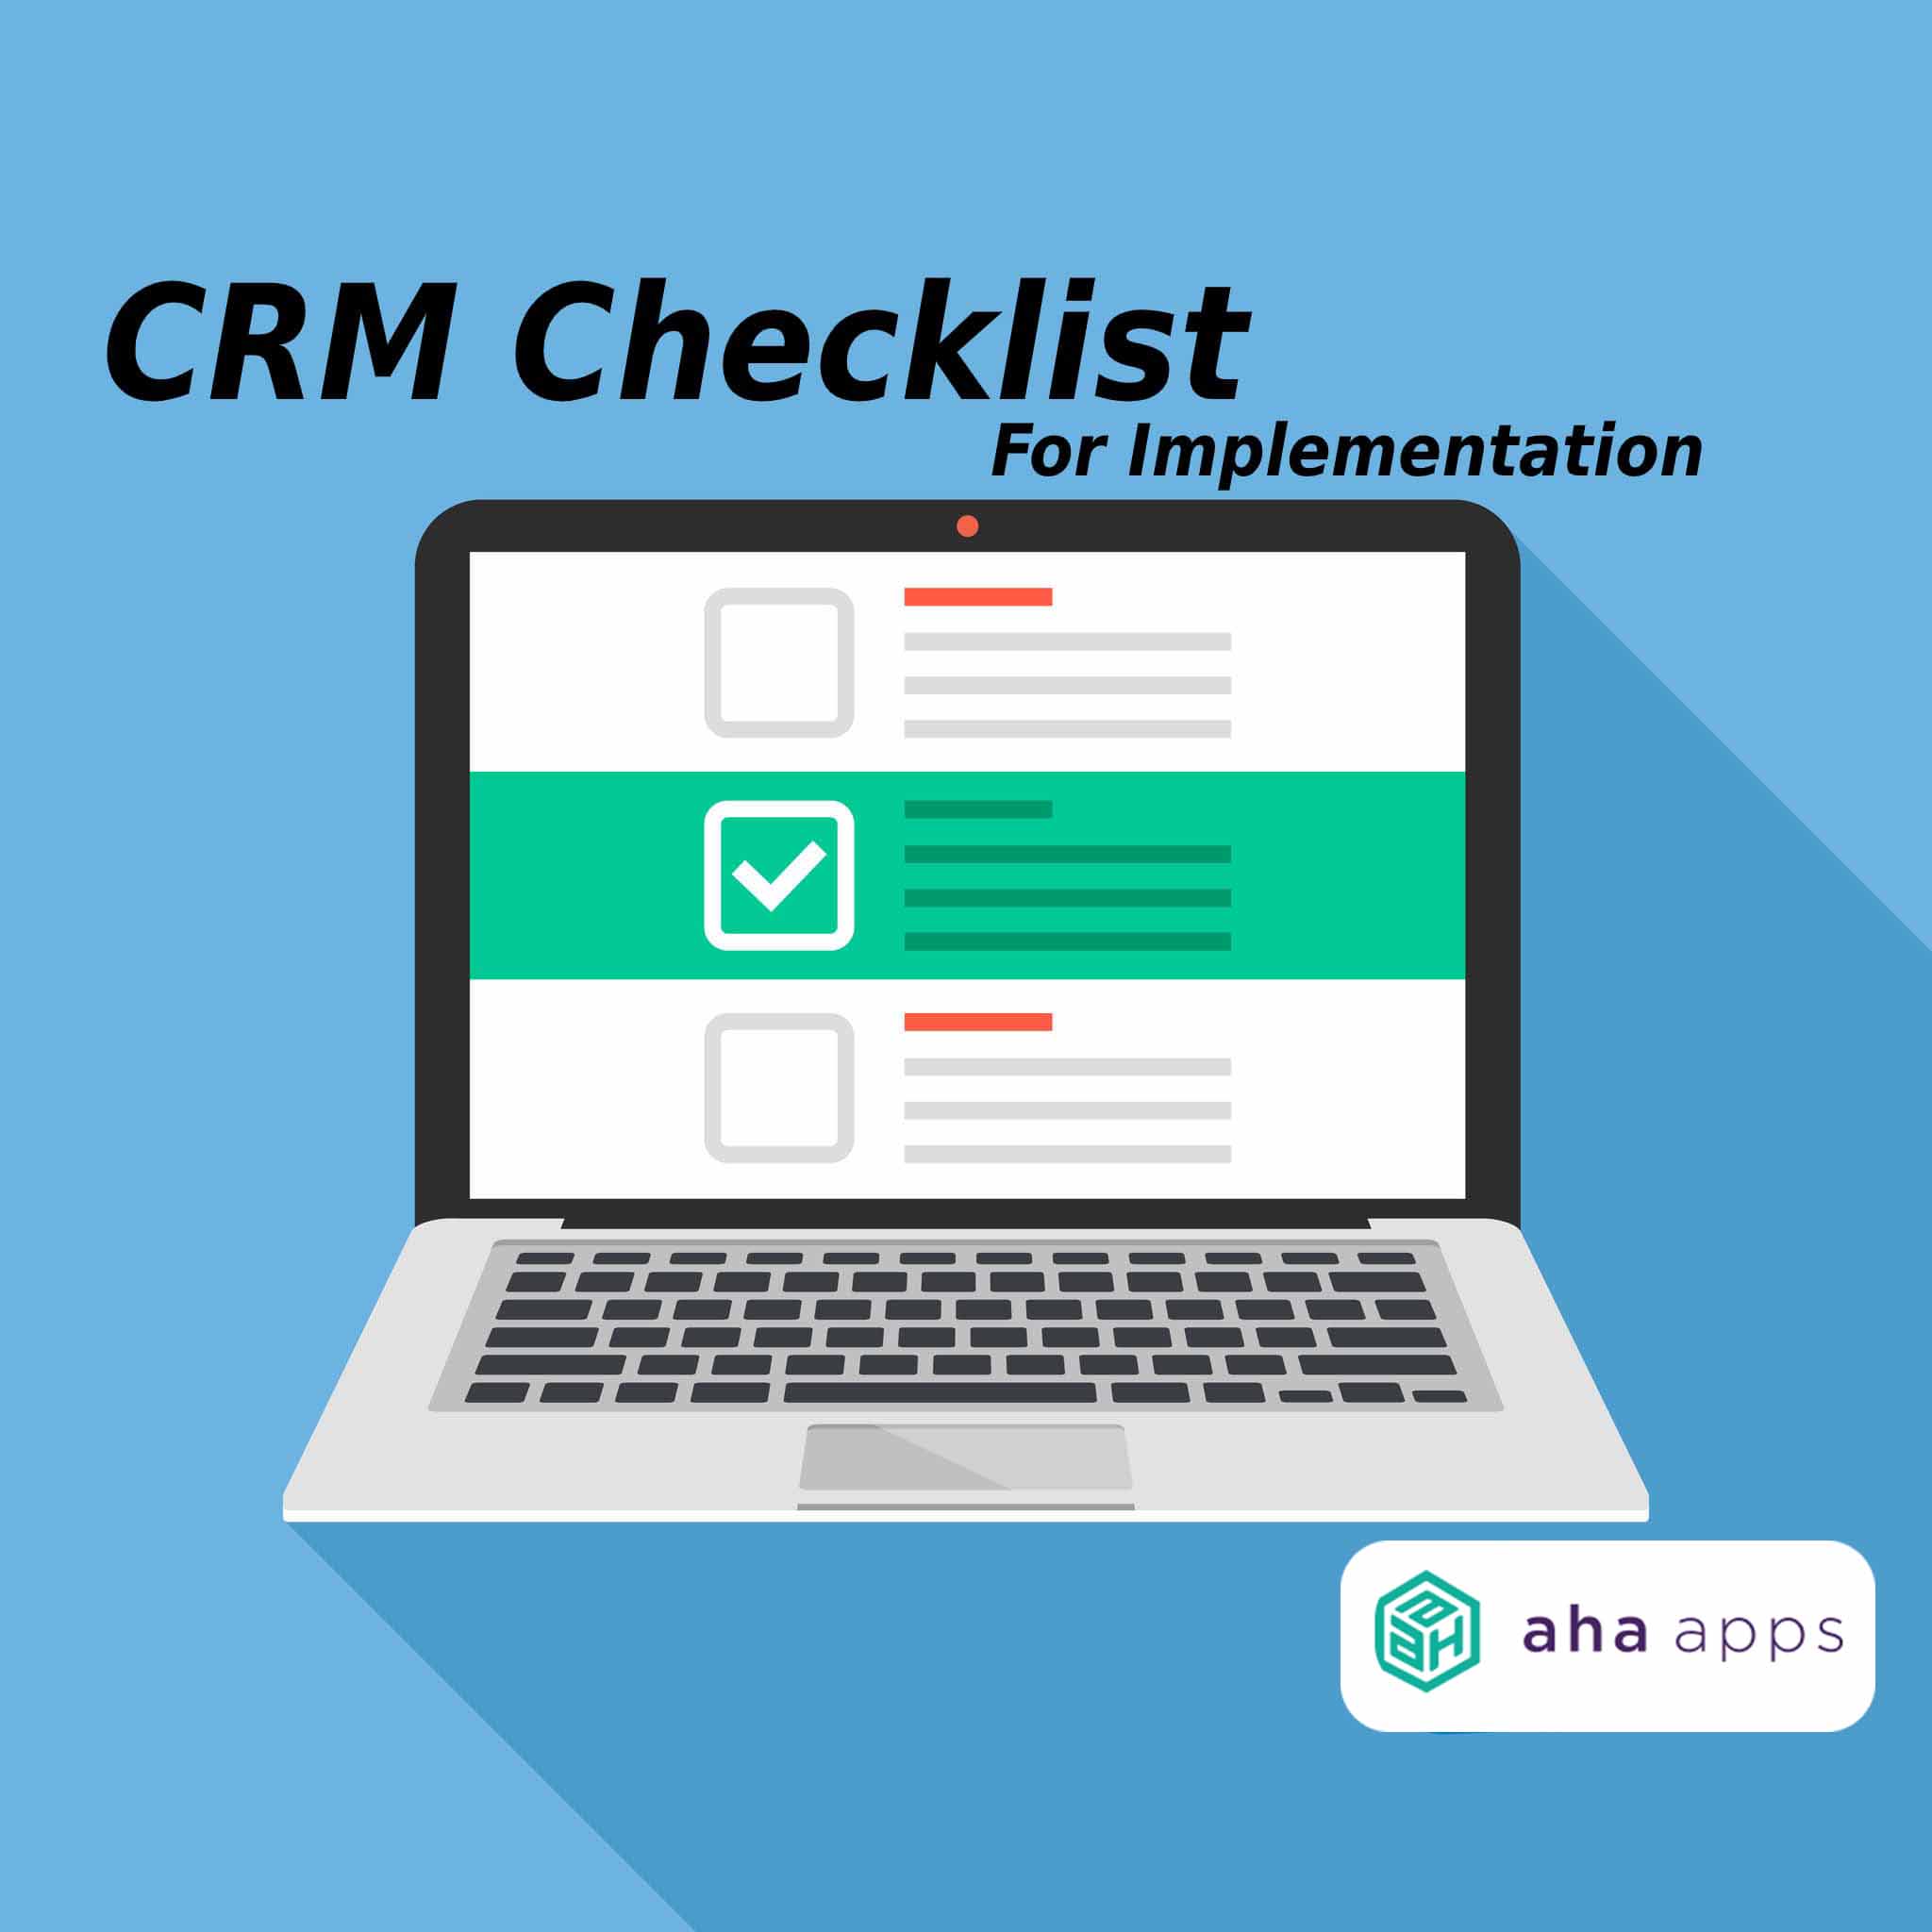 CRM Checklist For Implementation - AhaApps